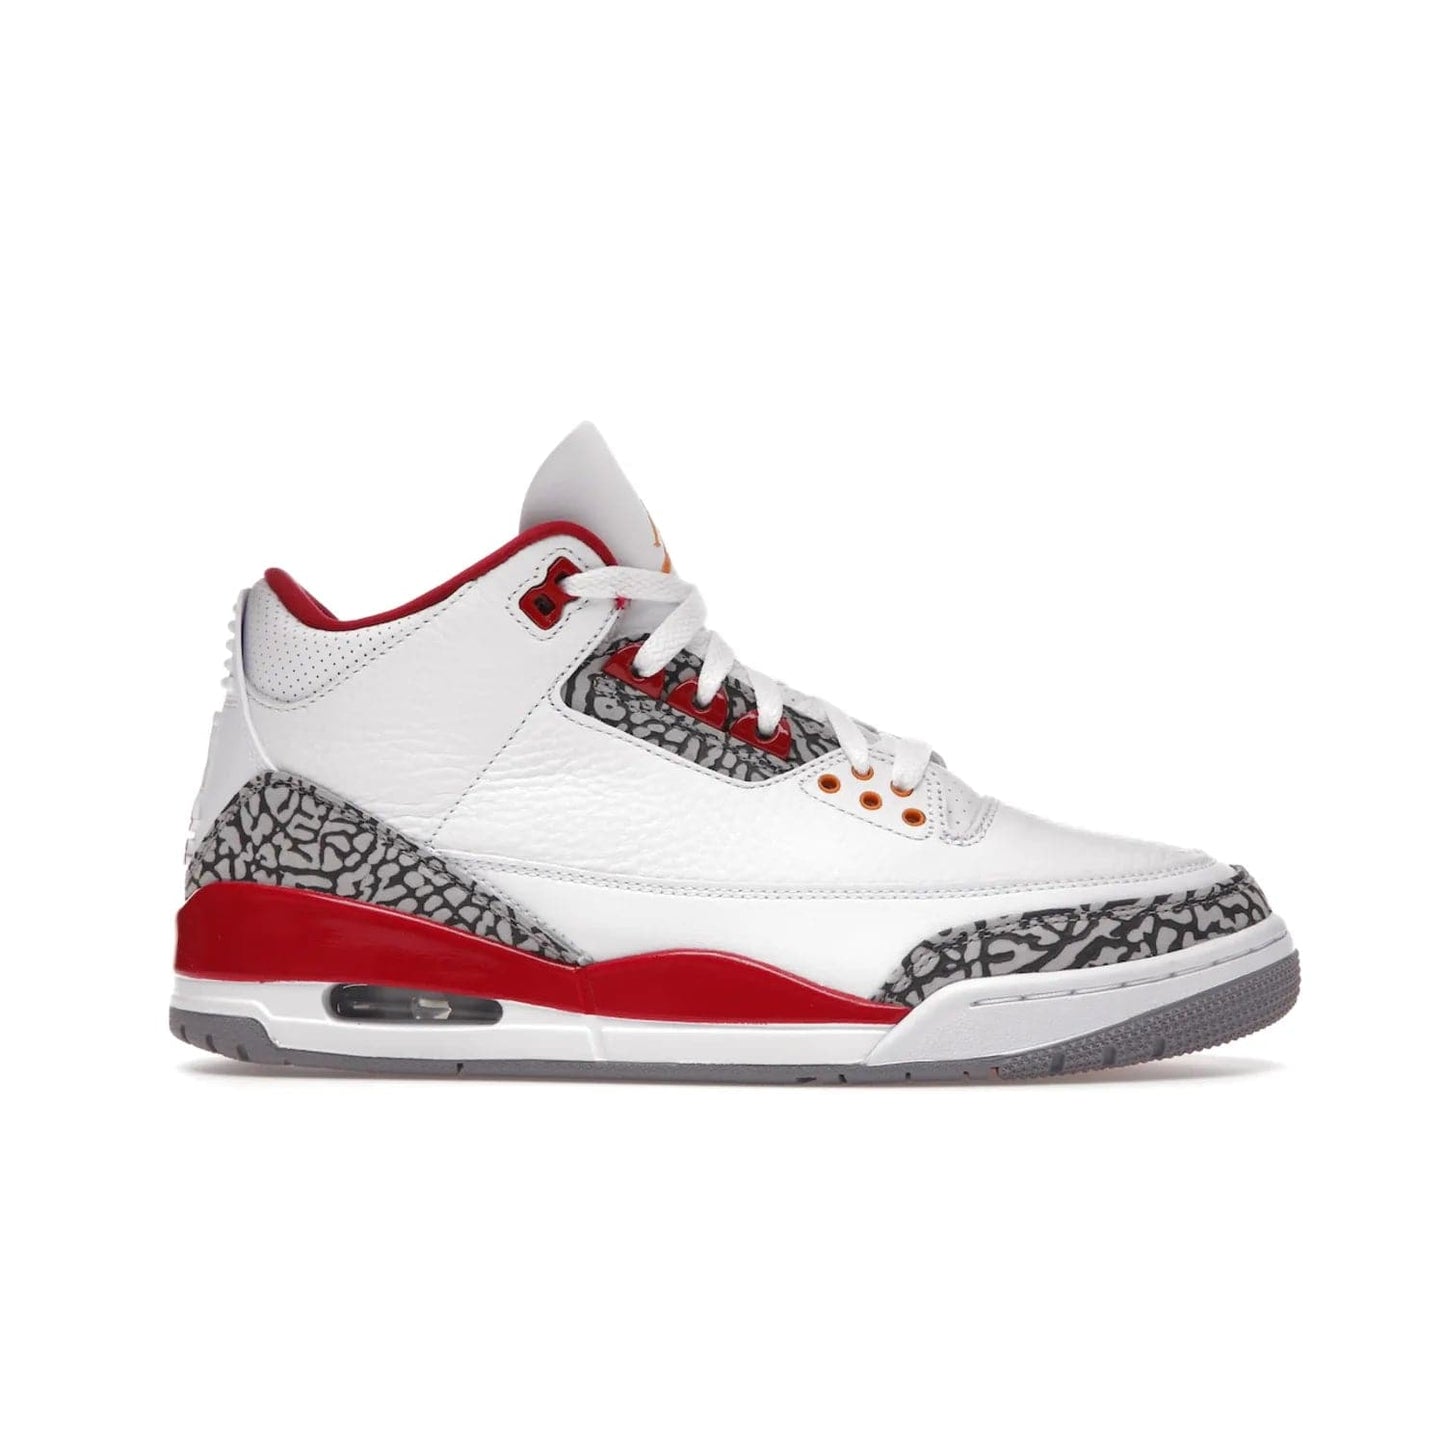 Jordan 3 Retro Cardinal Red - Image 2 - Only at www.BallersClubKickz.com - Air Jordan 3 Retro Cardinal Red combines classic style and modern appeal - white tumbled leather, signature Elephant Print overlays, cardinal red midsoles, Jumpman logo embroidery. Available Feb 2022.